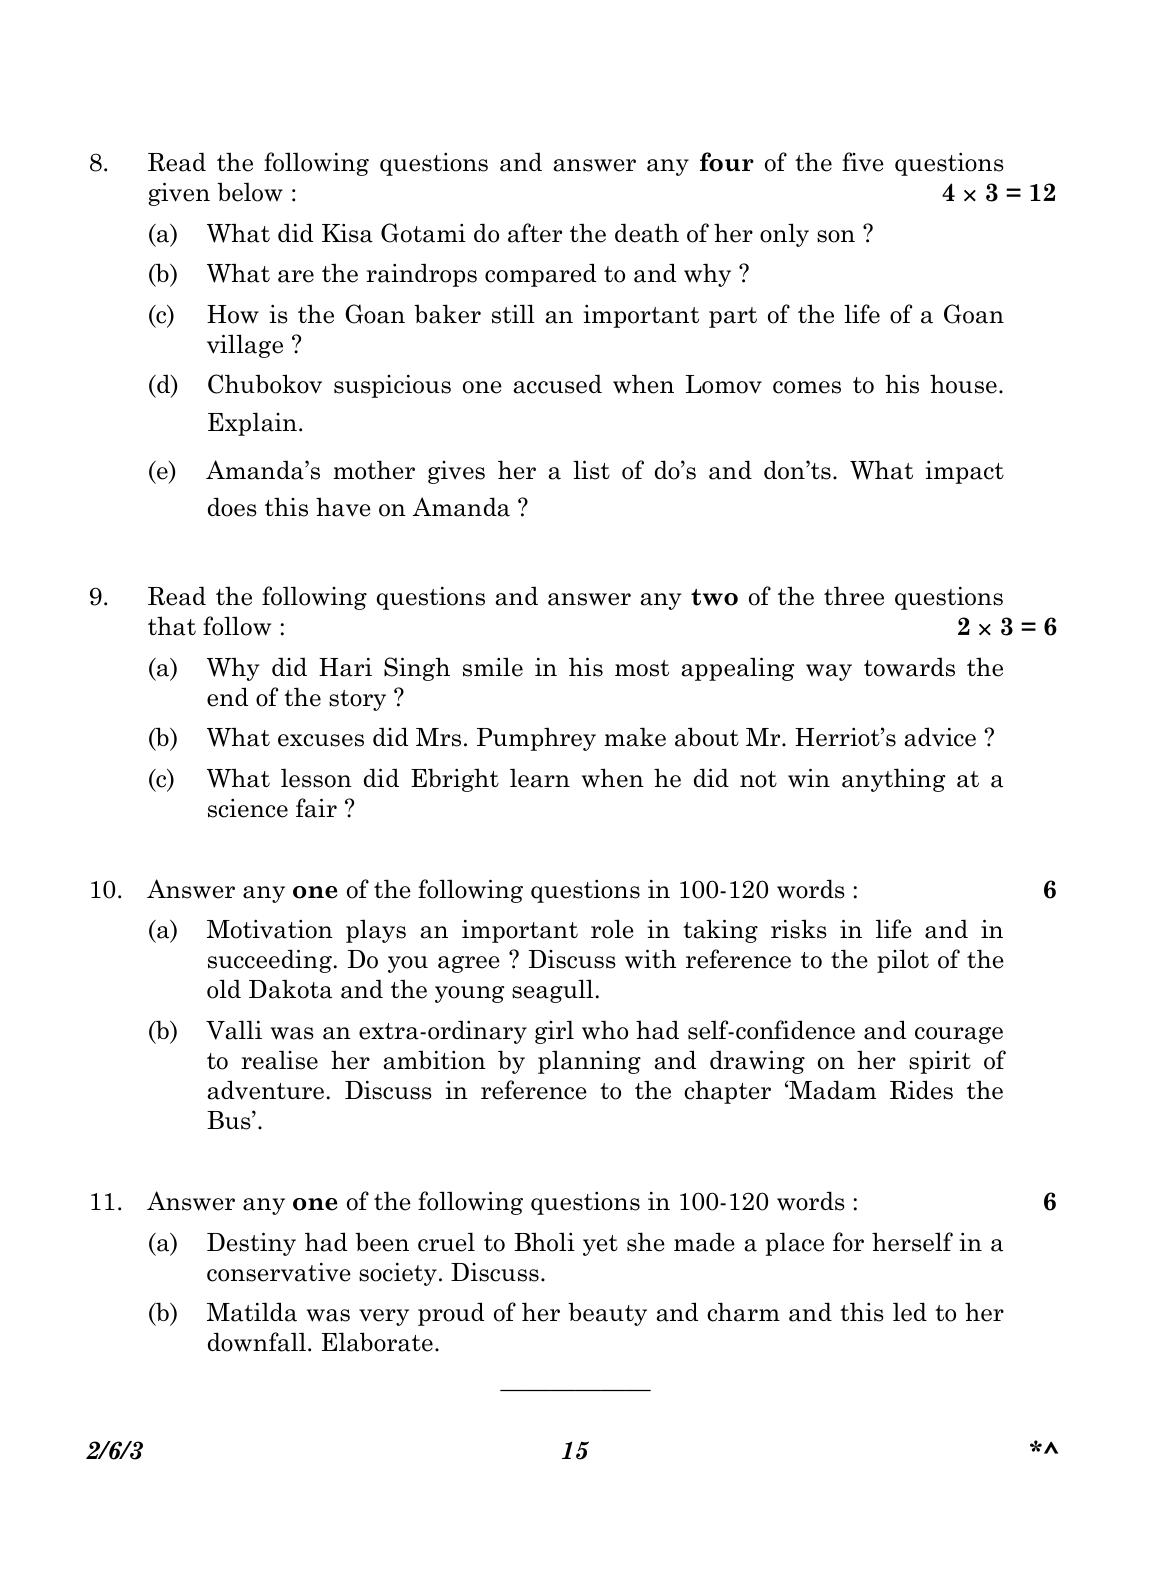 CBSE Class 10 2-6-3_English Language And Literature 2023 Question Paper - Page 15